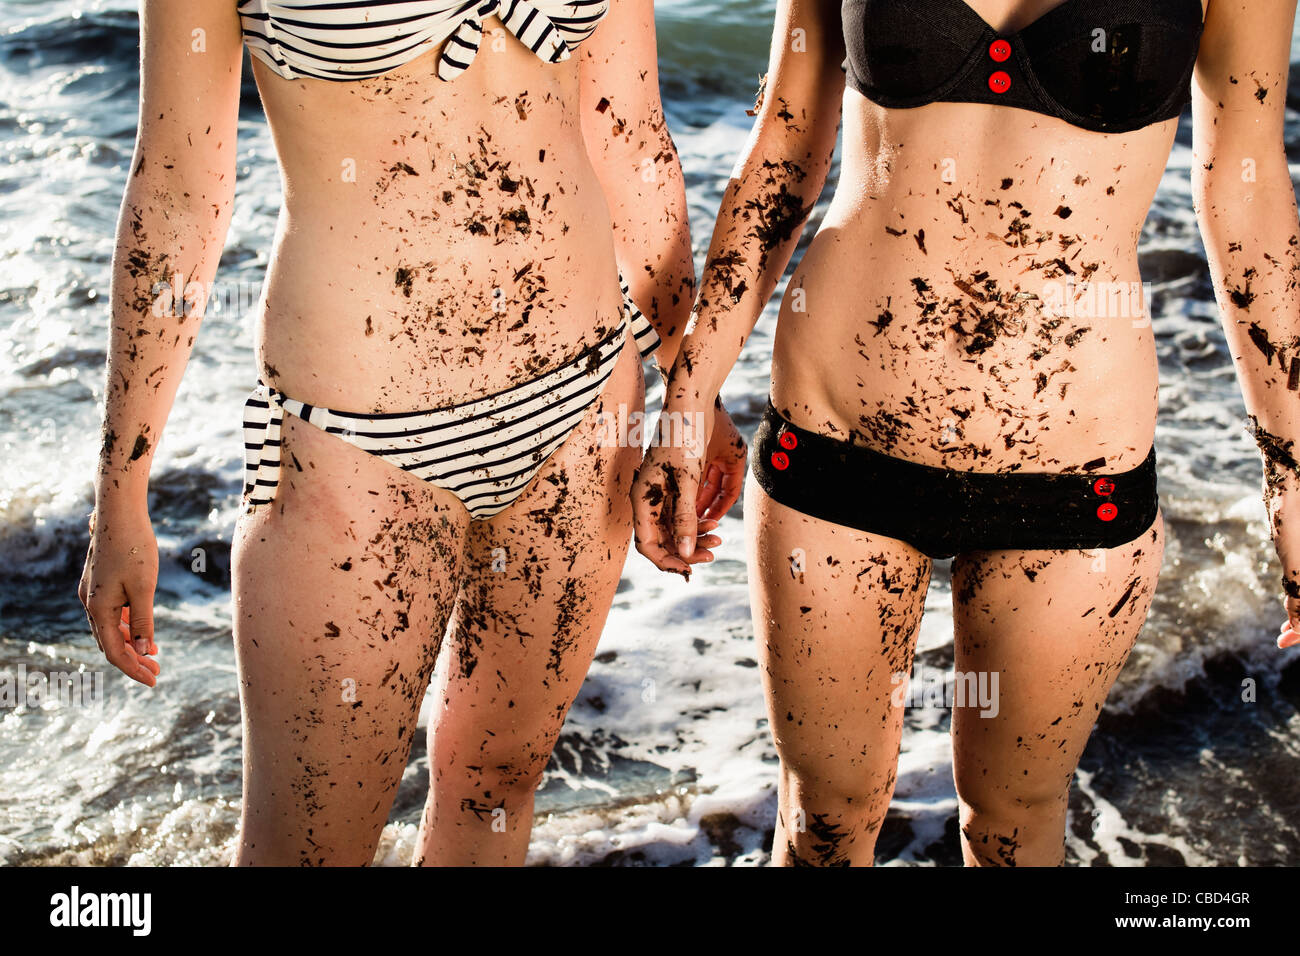 Women covered in sand on beach Stock Photo